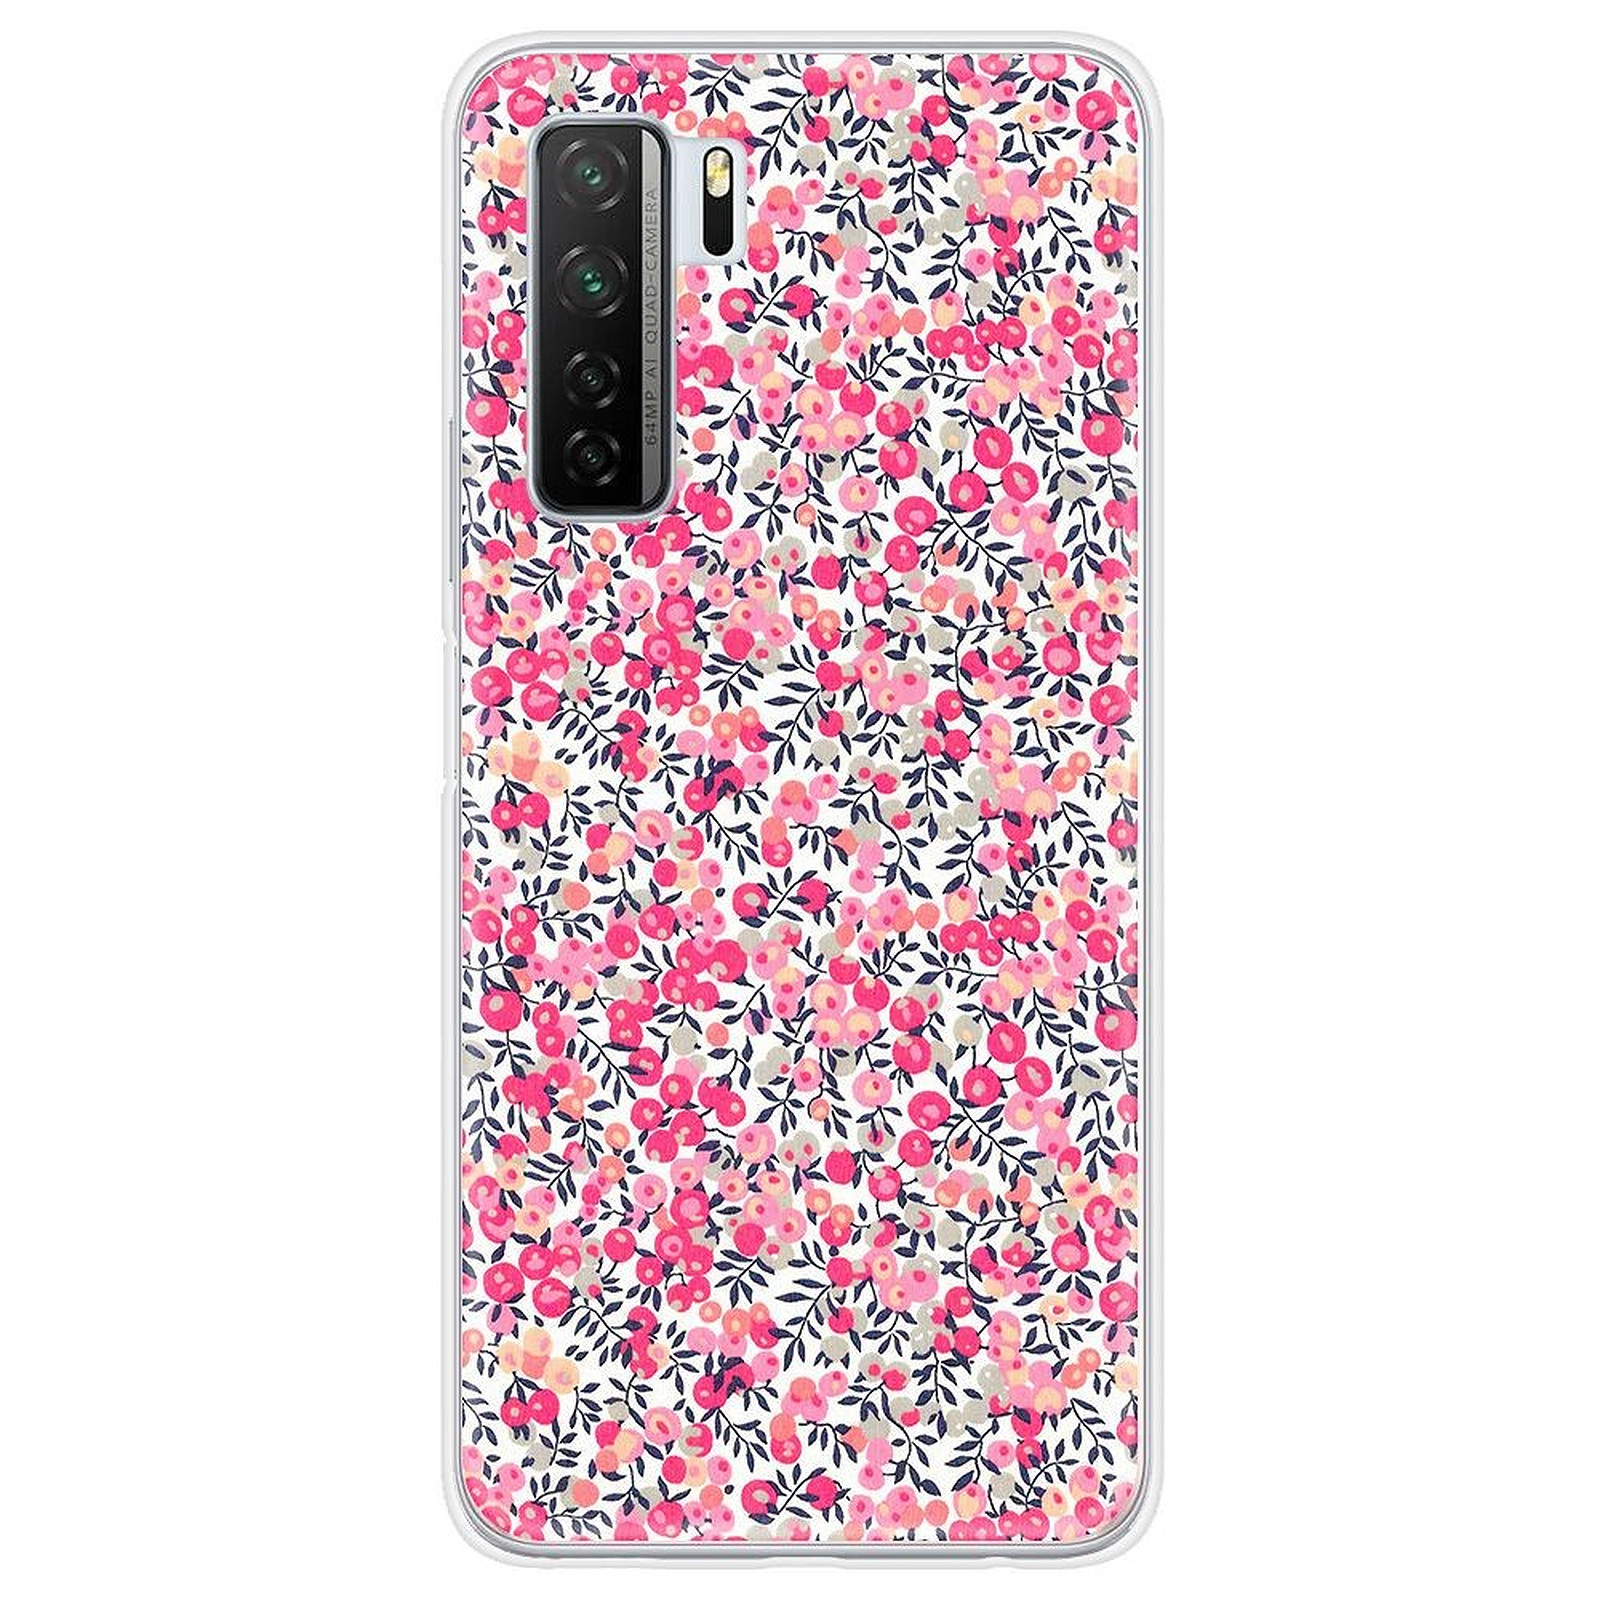 1001 Coques Coque silicone gel Huawei P40 Lite 5G motif Liberty Wiltshire Rose - Coque telephone 1001Coques